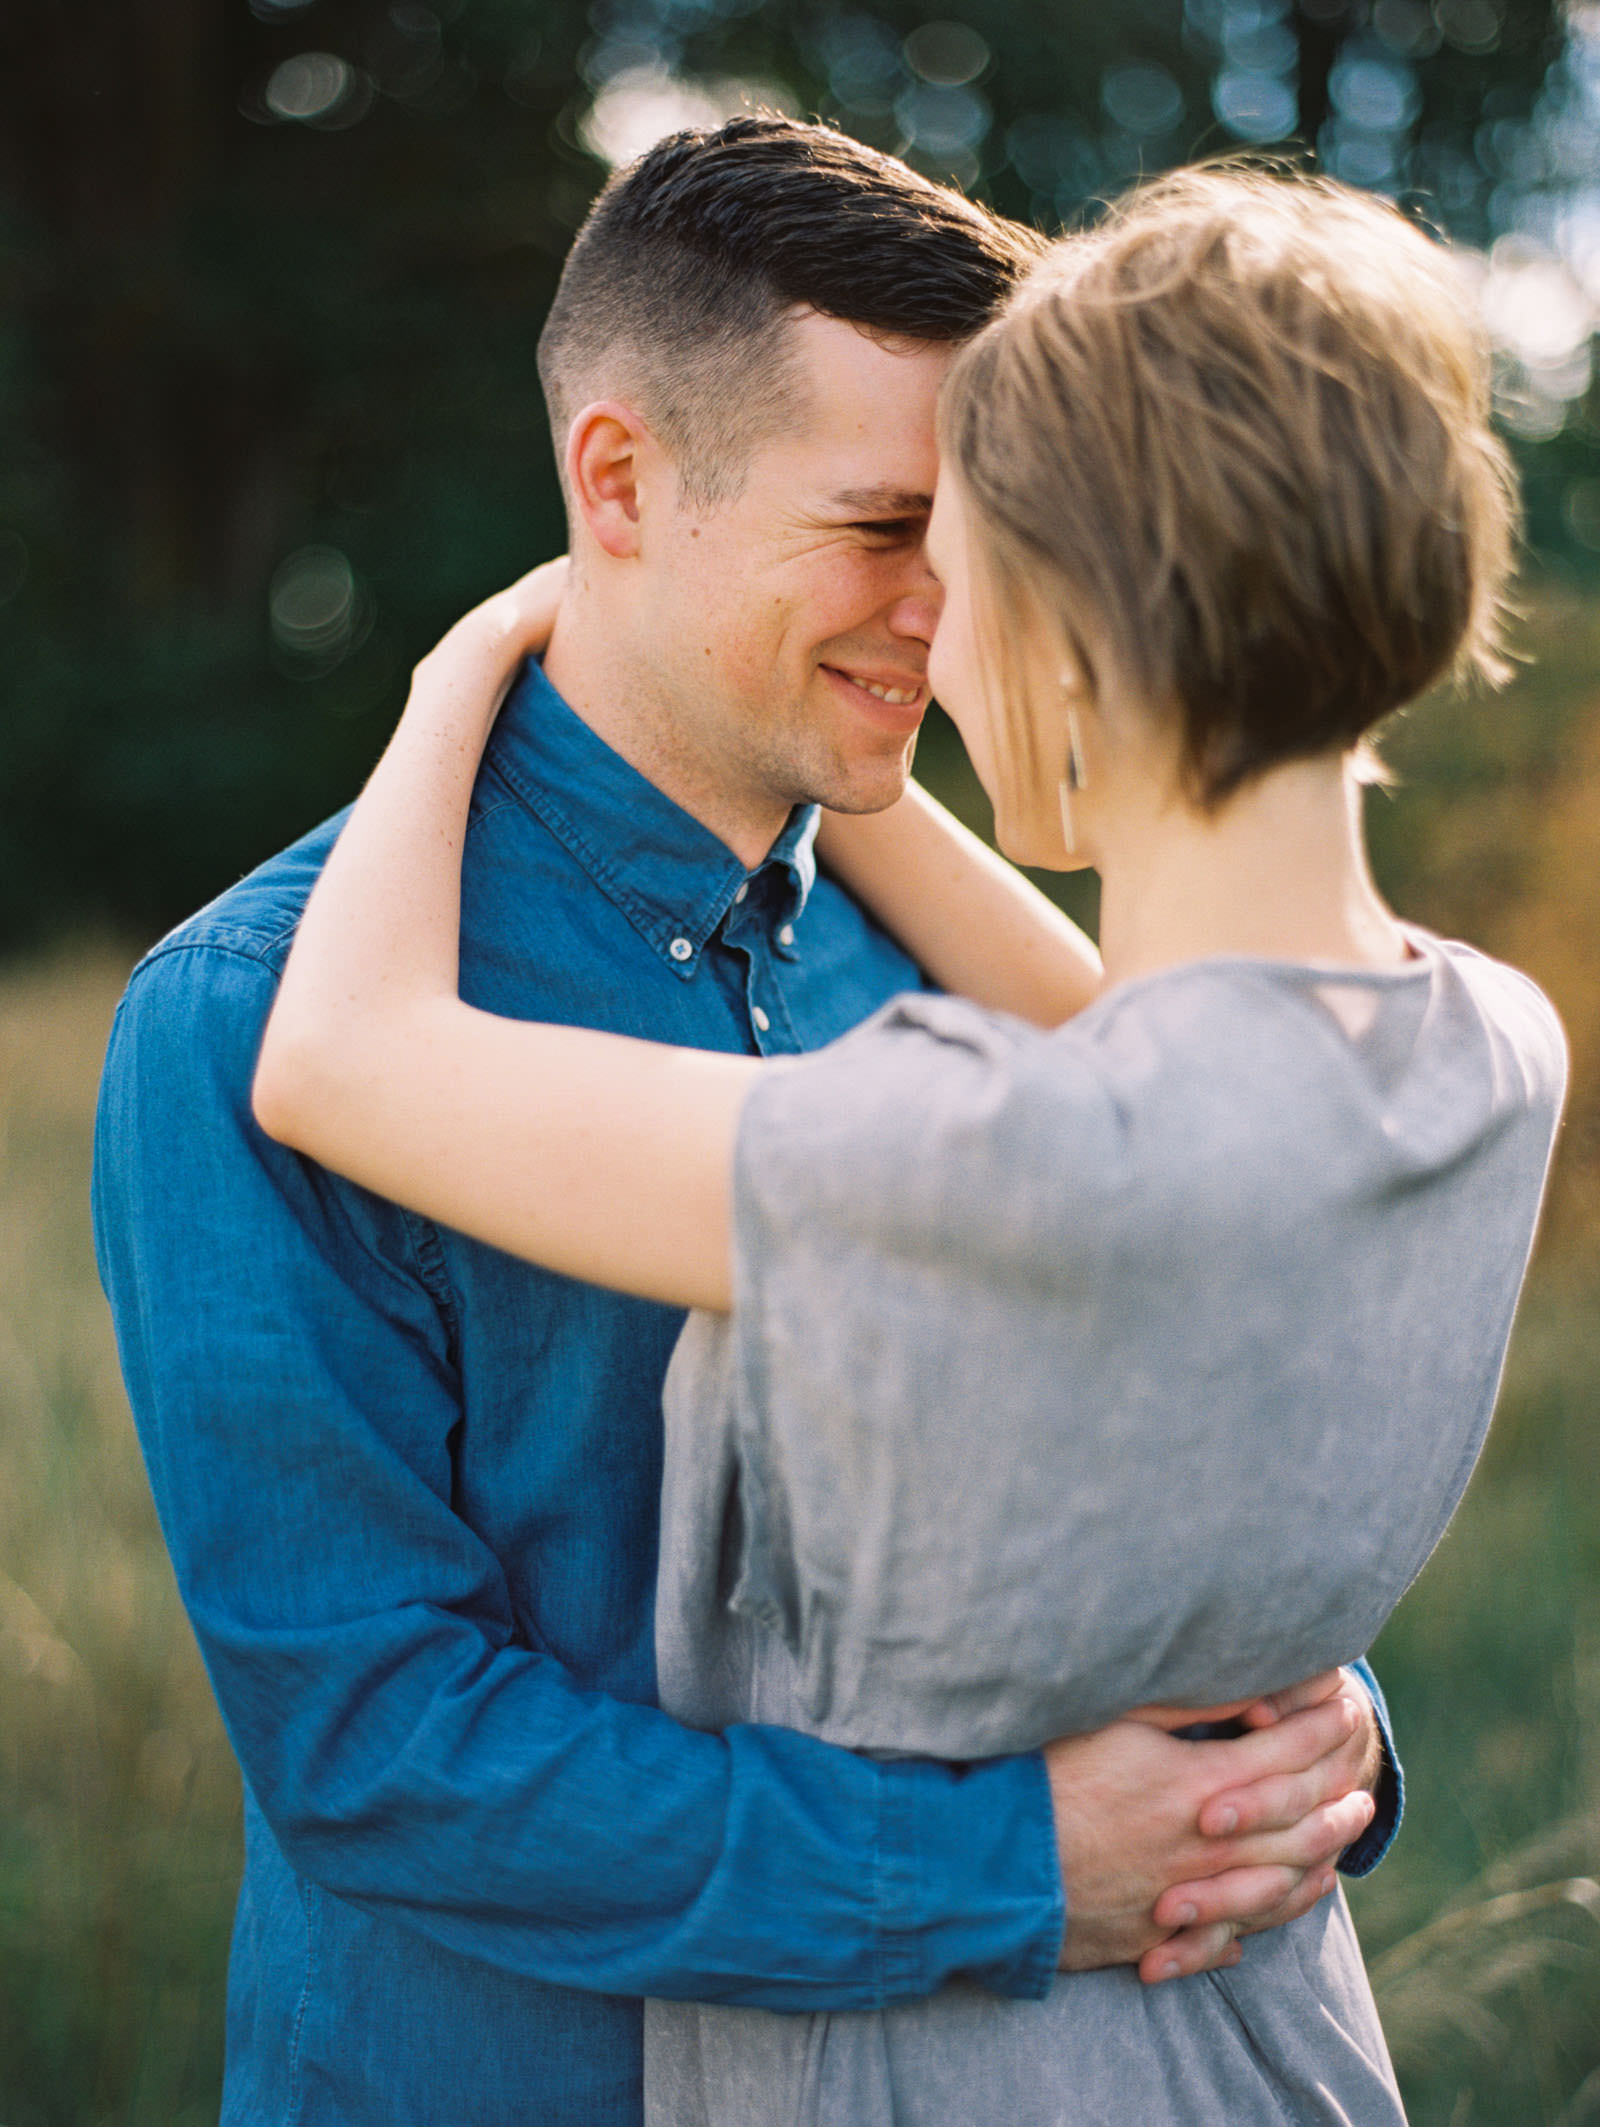 Snuggling close at a discovery park engagement session captured by Seattle FIlm Wedding Photographer Anna Peters